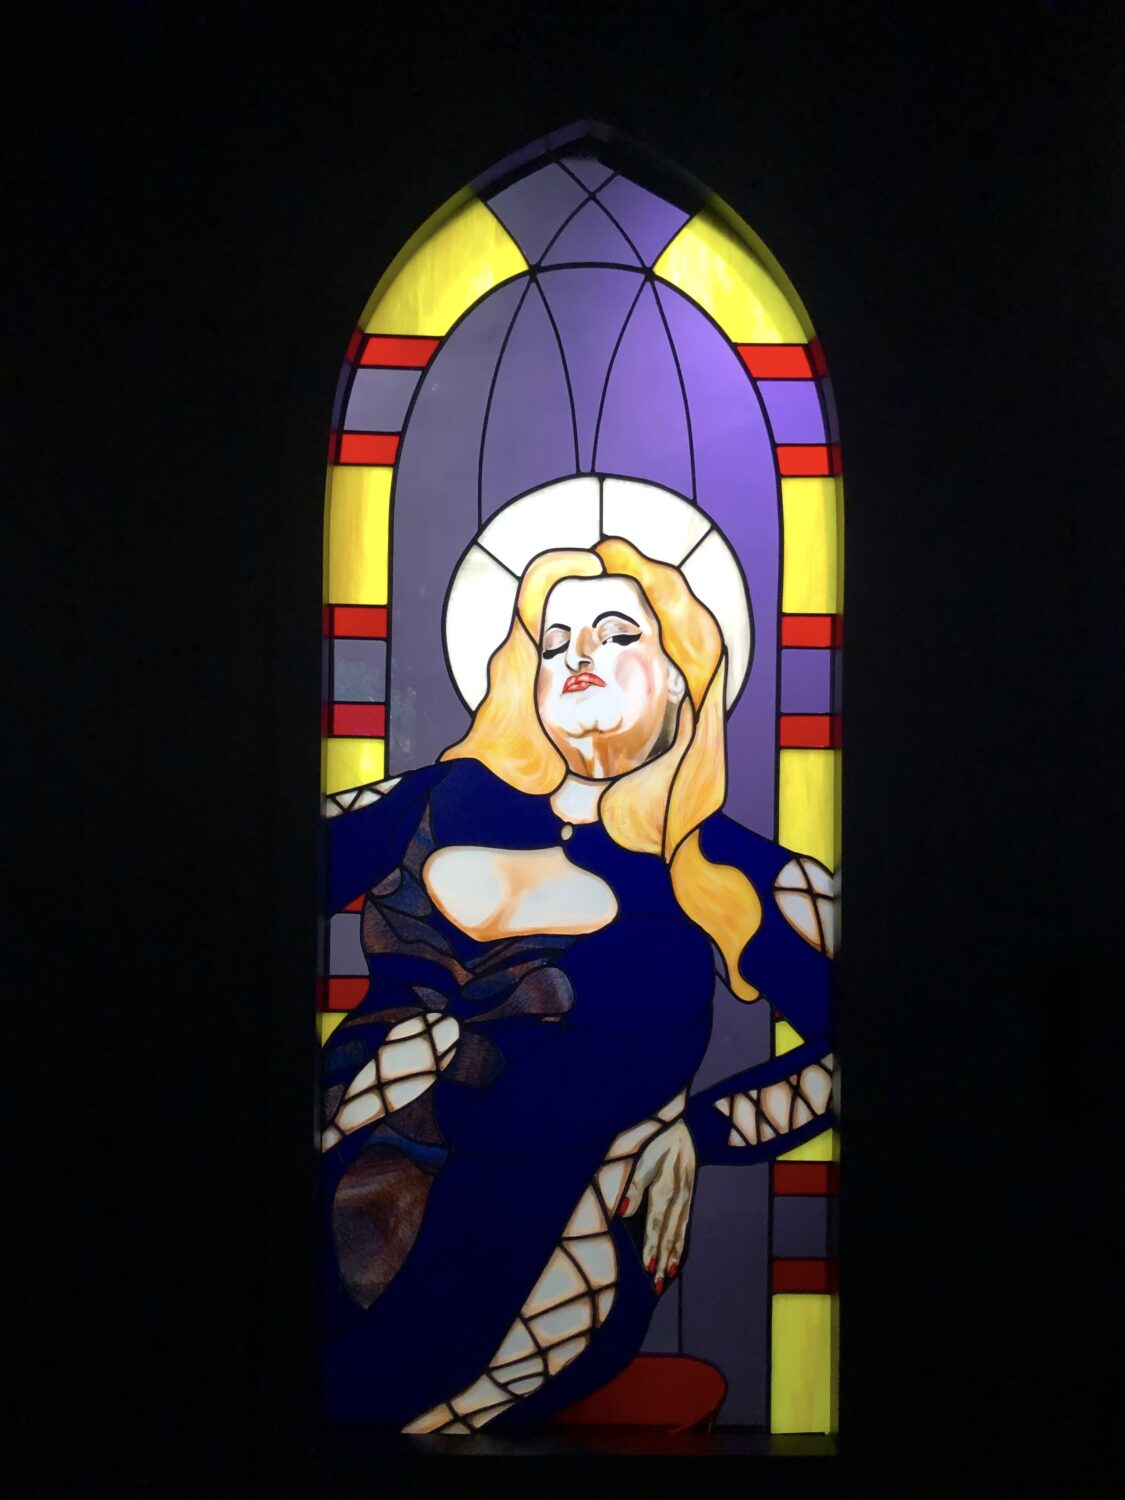 Edith Massey stained glass by Amanda Maccagnan at the Academy Museum Photo by Shana Nys Dambrot